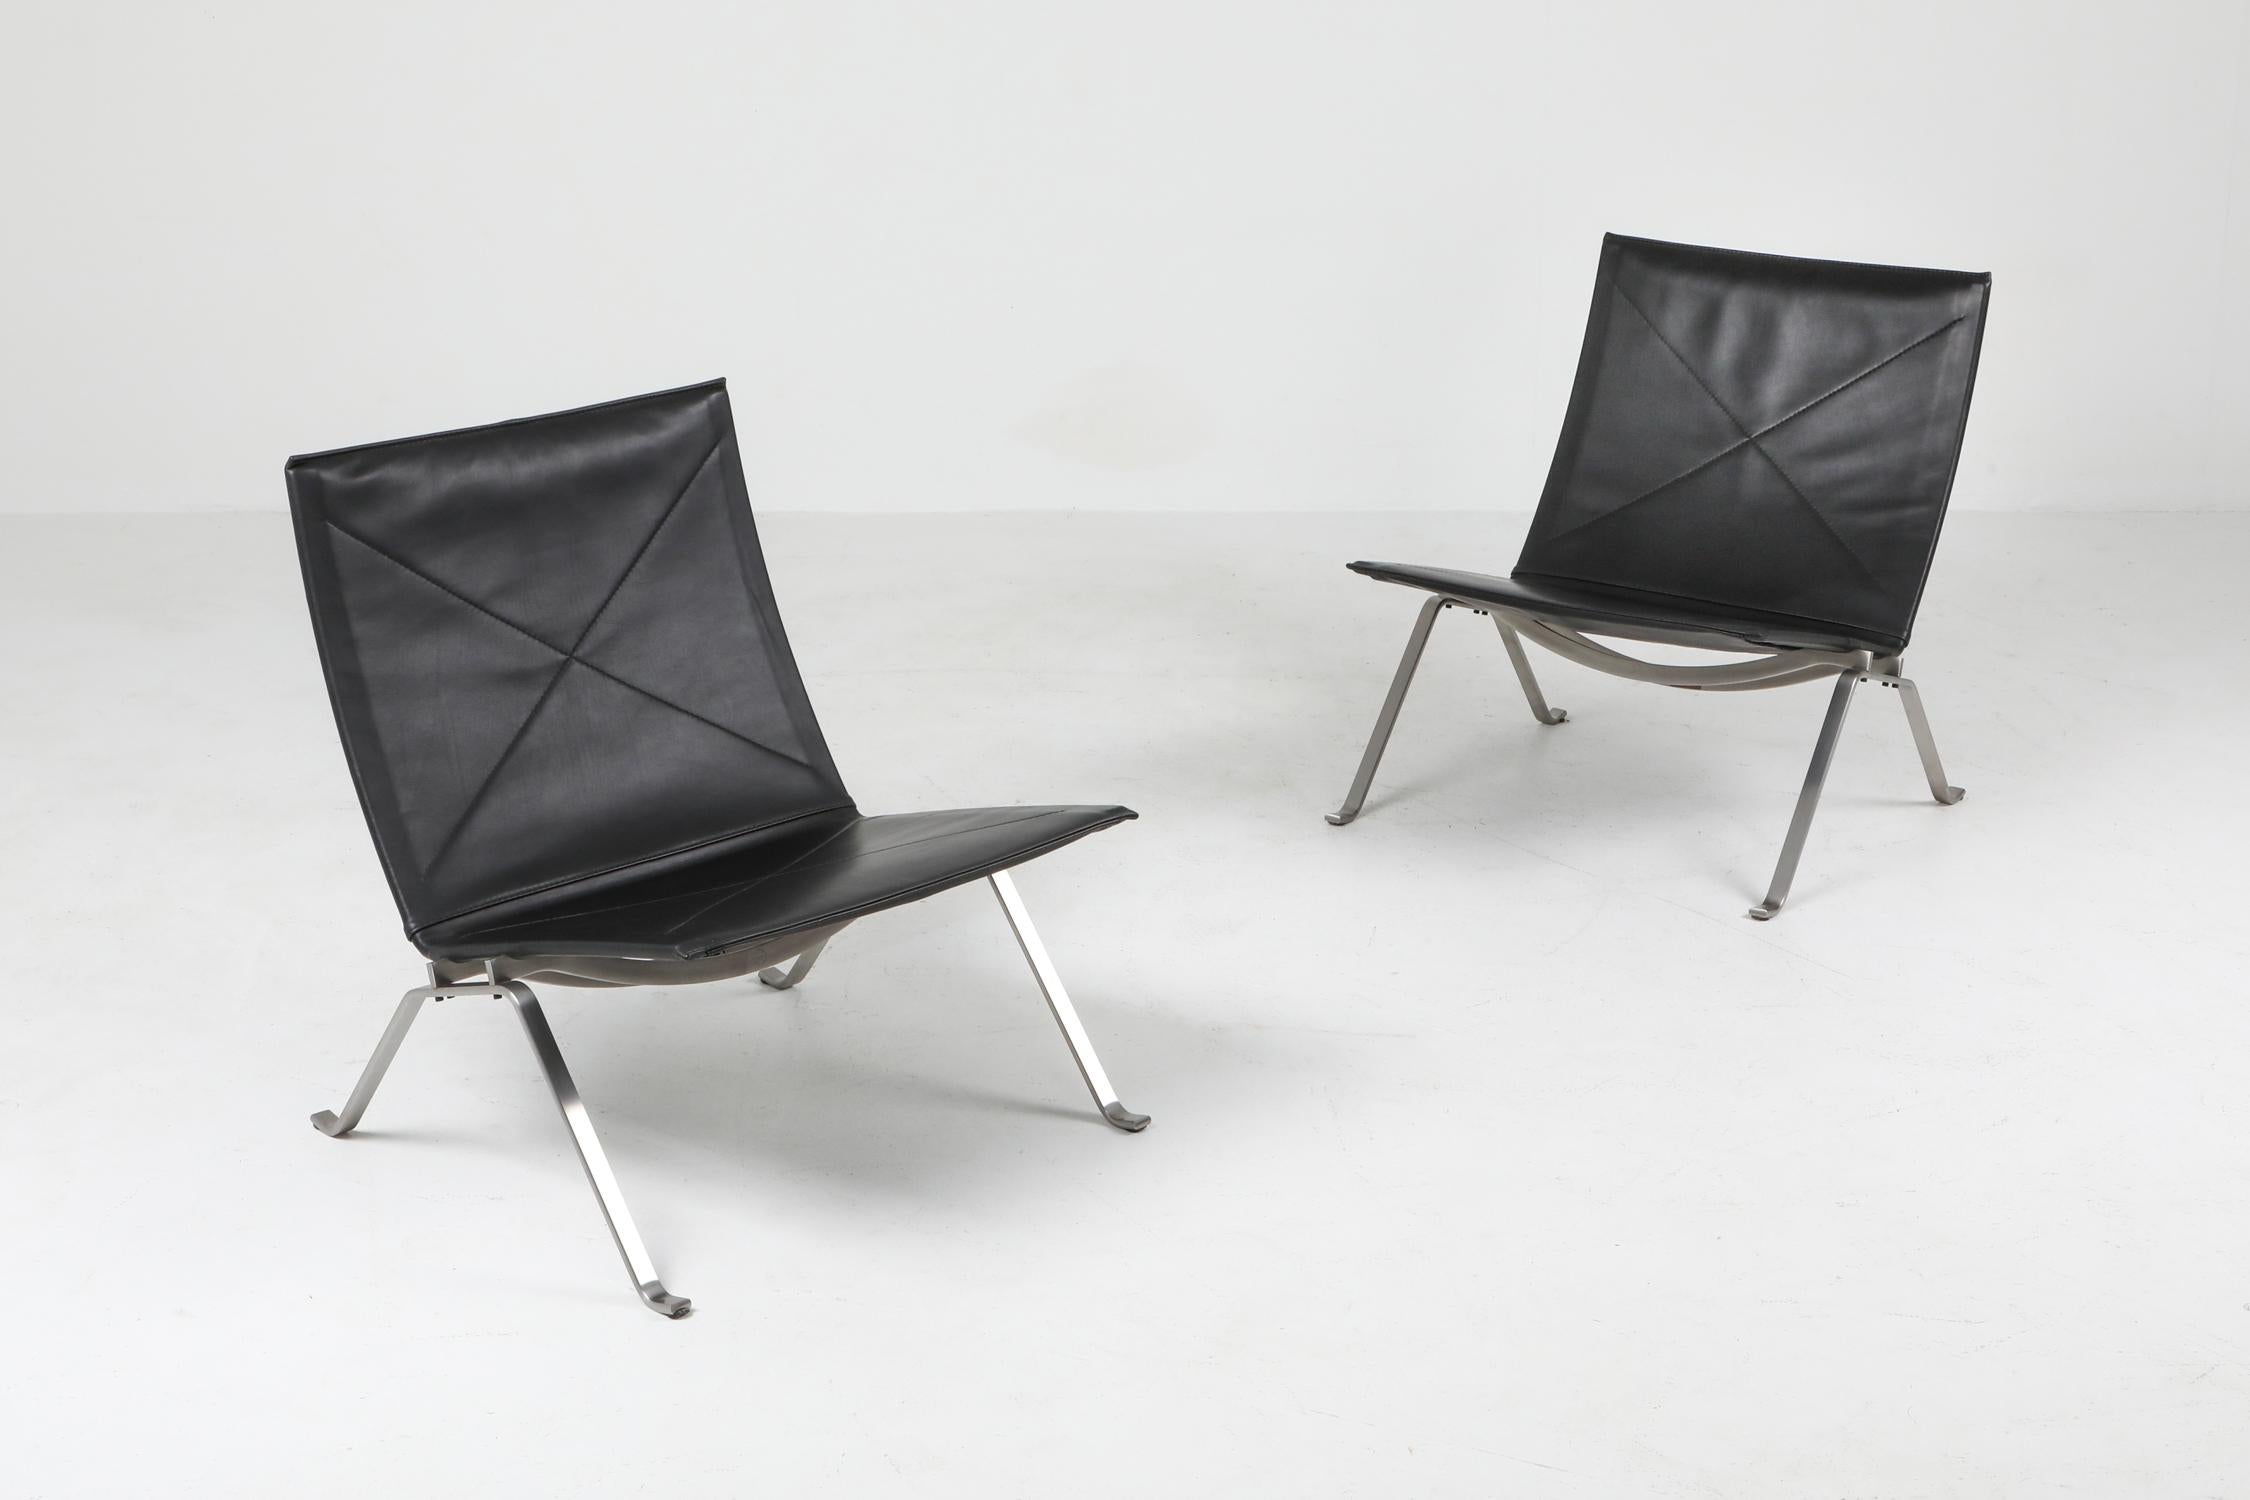 Poul Kjaerholm, PK 22 aura black leather, Fritz Hansen Denmark

The discrete and elegant lounge chair PK22 epitomizes the work of Poul Kjærholm and his search for the ideal type-form and Industrial dimension, which was always present in his work.